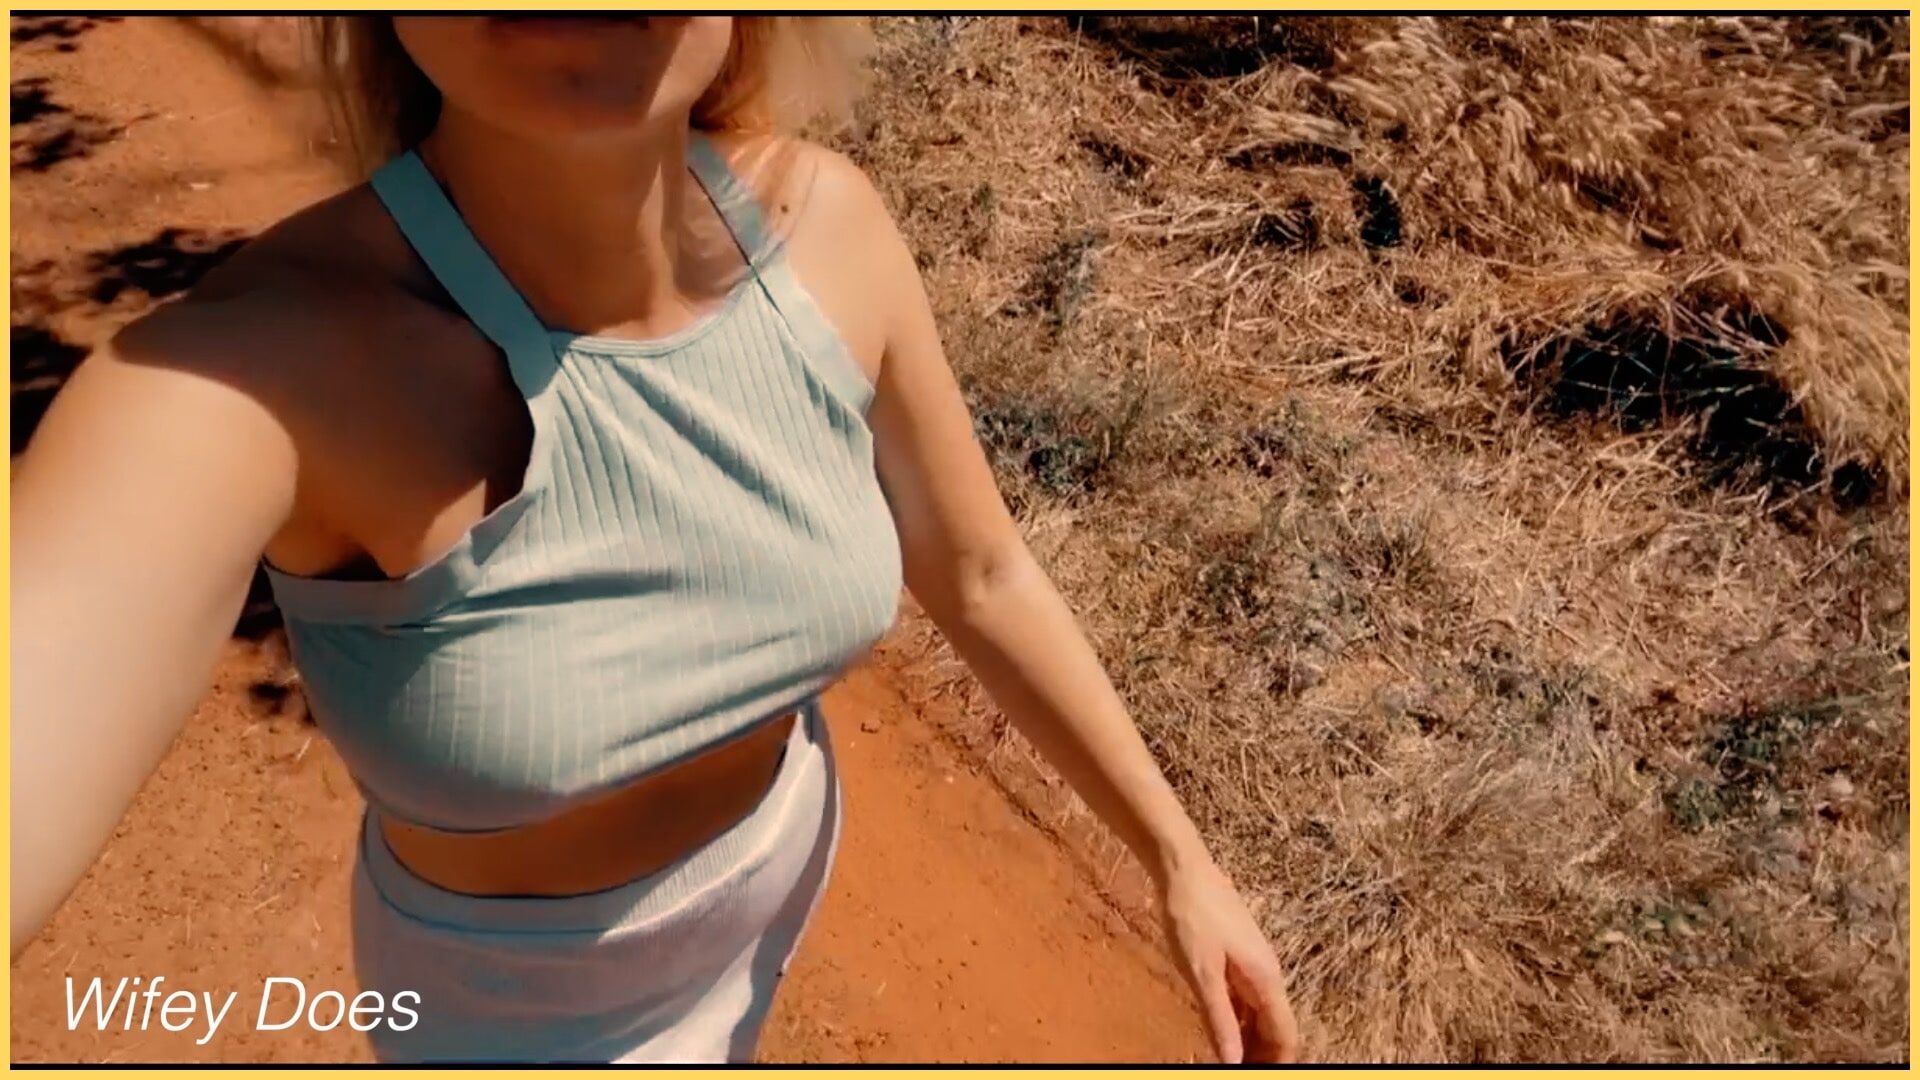 Wifey heads on hike braless and no panties #8